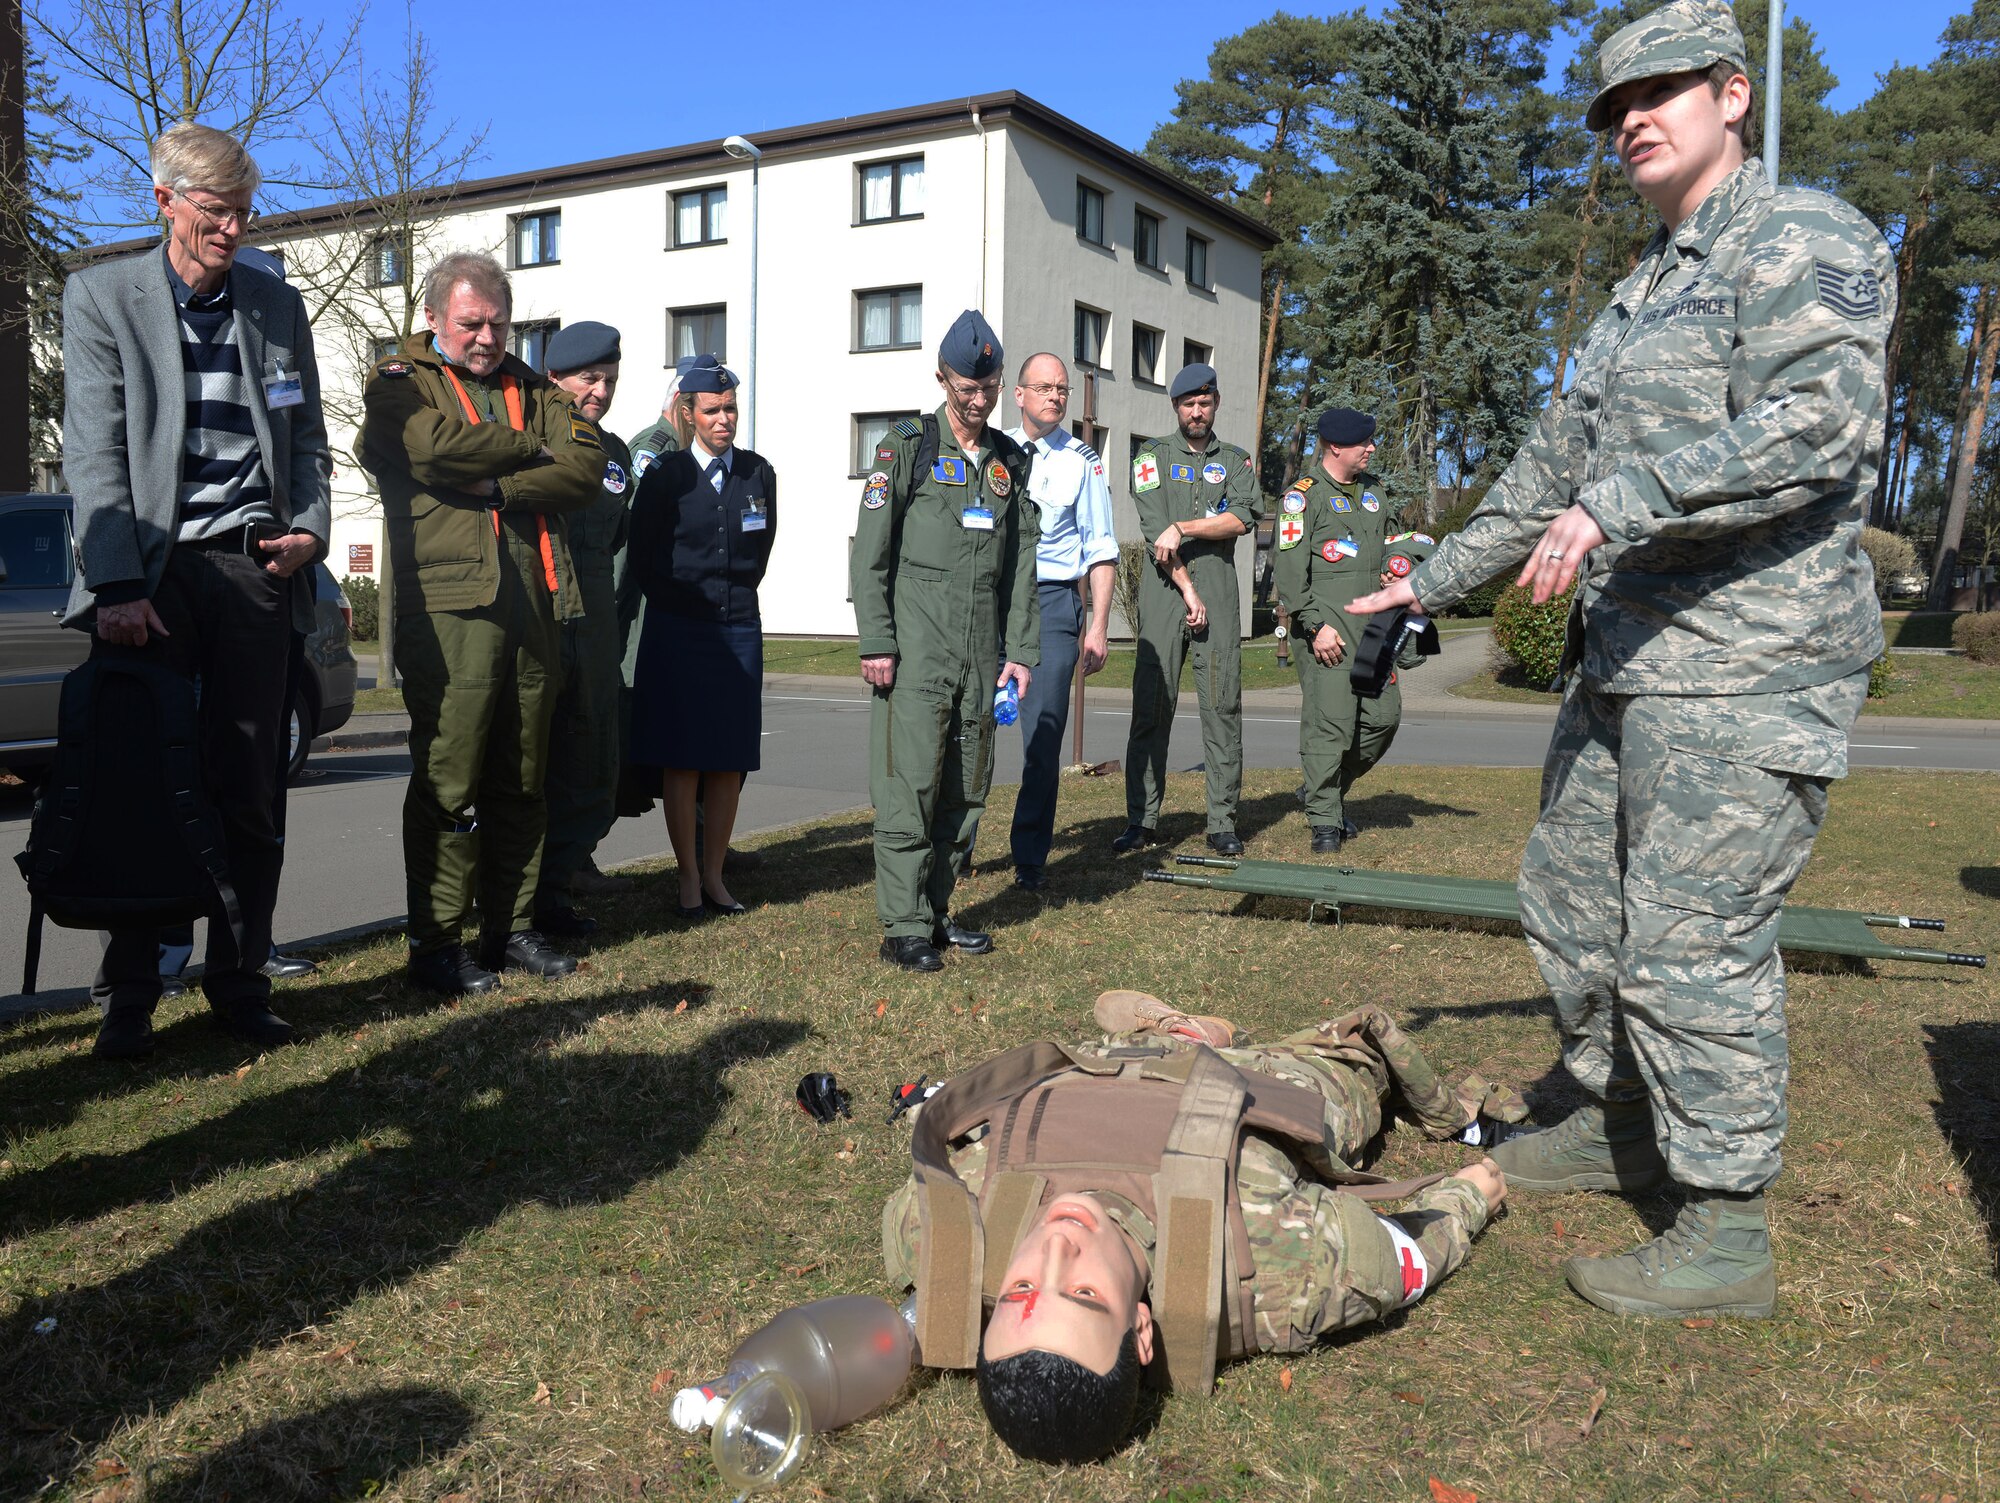 RAMSTEIN AIR BASE, Germany -- Tech. Sgt. Mariah Pike, 86th Airlift Wing self aid buddy care advisor, explains to attendees of the 29th Annual Aerospace Medicine Summit and NATO Science and Technology Organization Technical Course some of the capabilities of human simulators outside the Hercules Theater here March 10. Pike also demonstrated how the simulators are used to train Airmen.  (U.S. Air Force Photo by Tech. Sgt. James M. Hodgman)